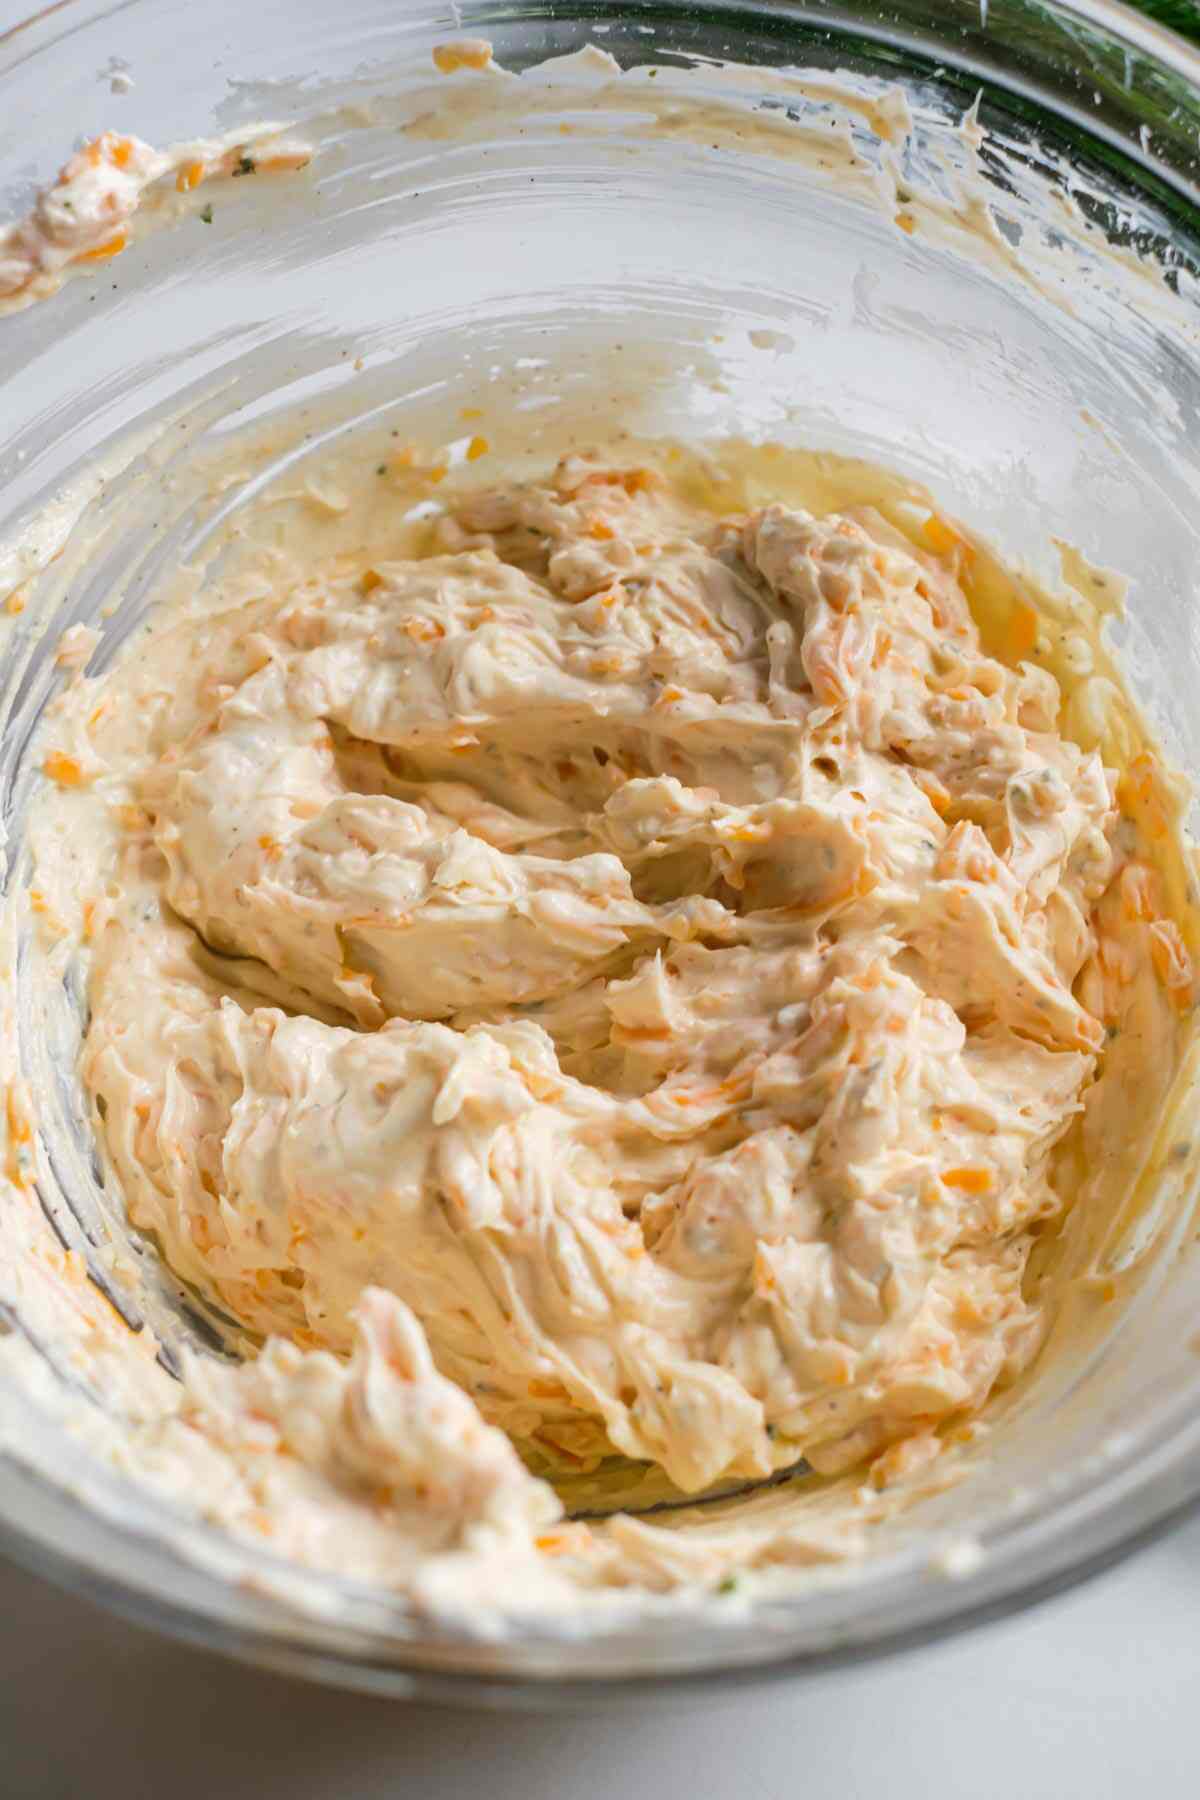 the cream cheese, mayo, dill and ranch dressing combined in a bowl